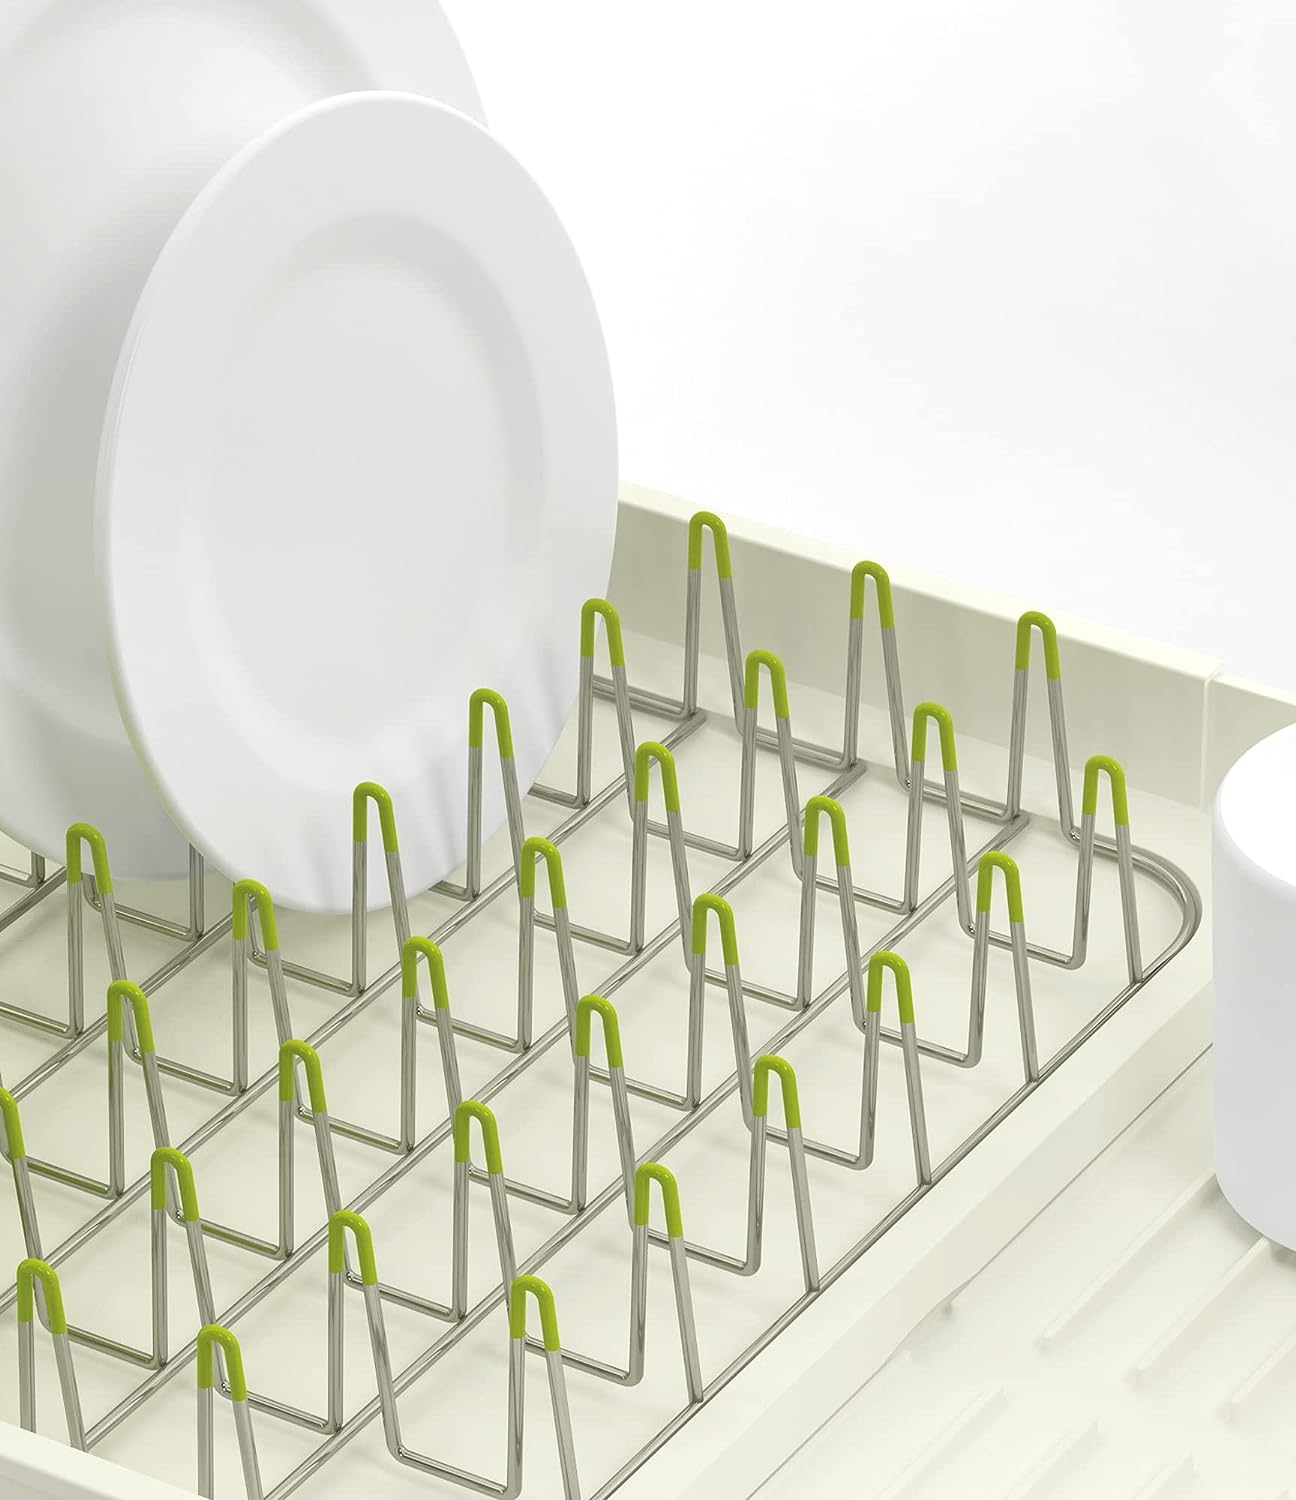 https://bigbigmart.com/wp-content/uploads/2023/10/Joseph-Joseph-85071-Extend-Expandable-Dish-Drying-Rack-and-Drainboard-Set-Foldaway-Integrated-Spout-Drainer-Removable-Steel-Rack-and-Cutlery-Holder-WhiteWhite-Green-Plastic3.jpg